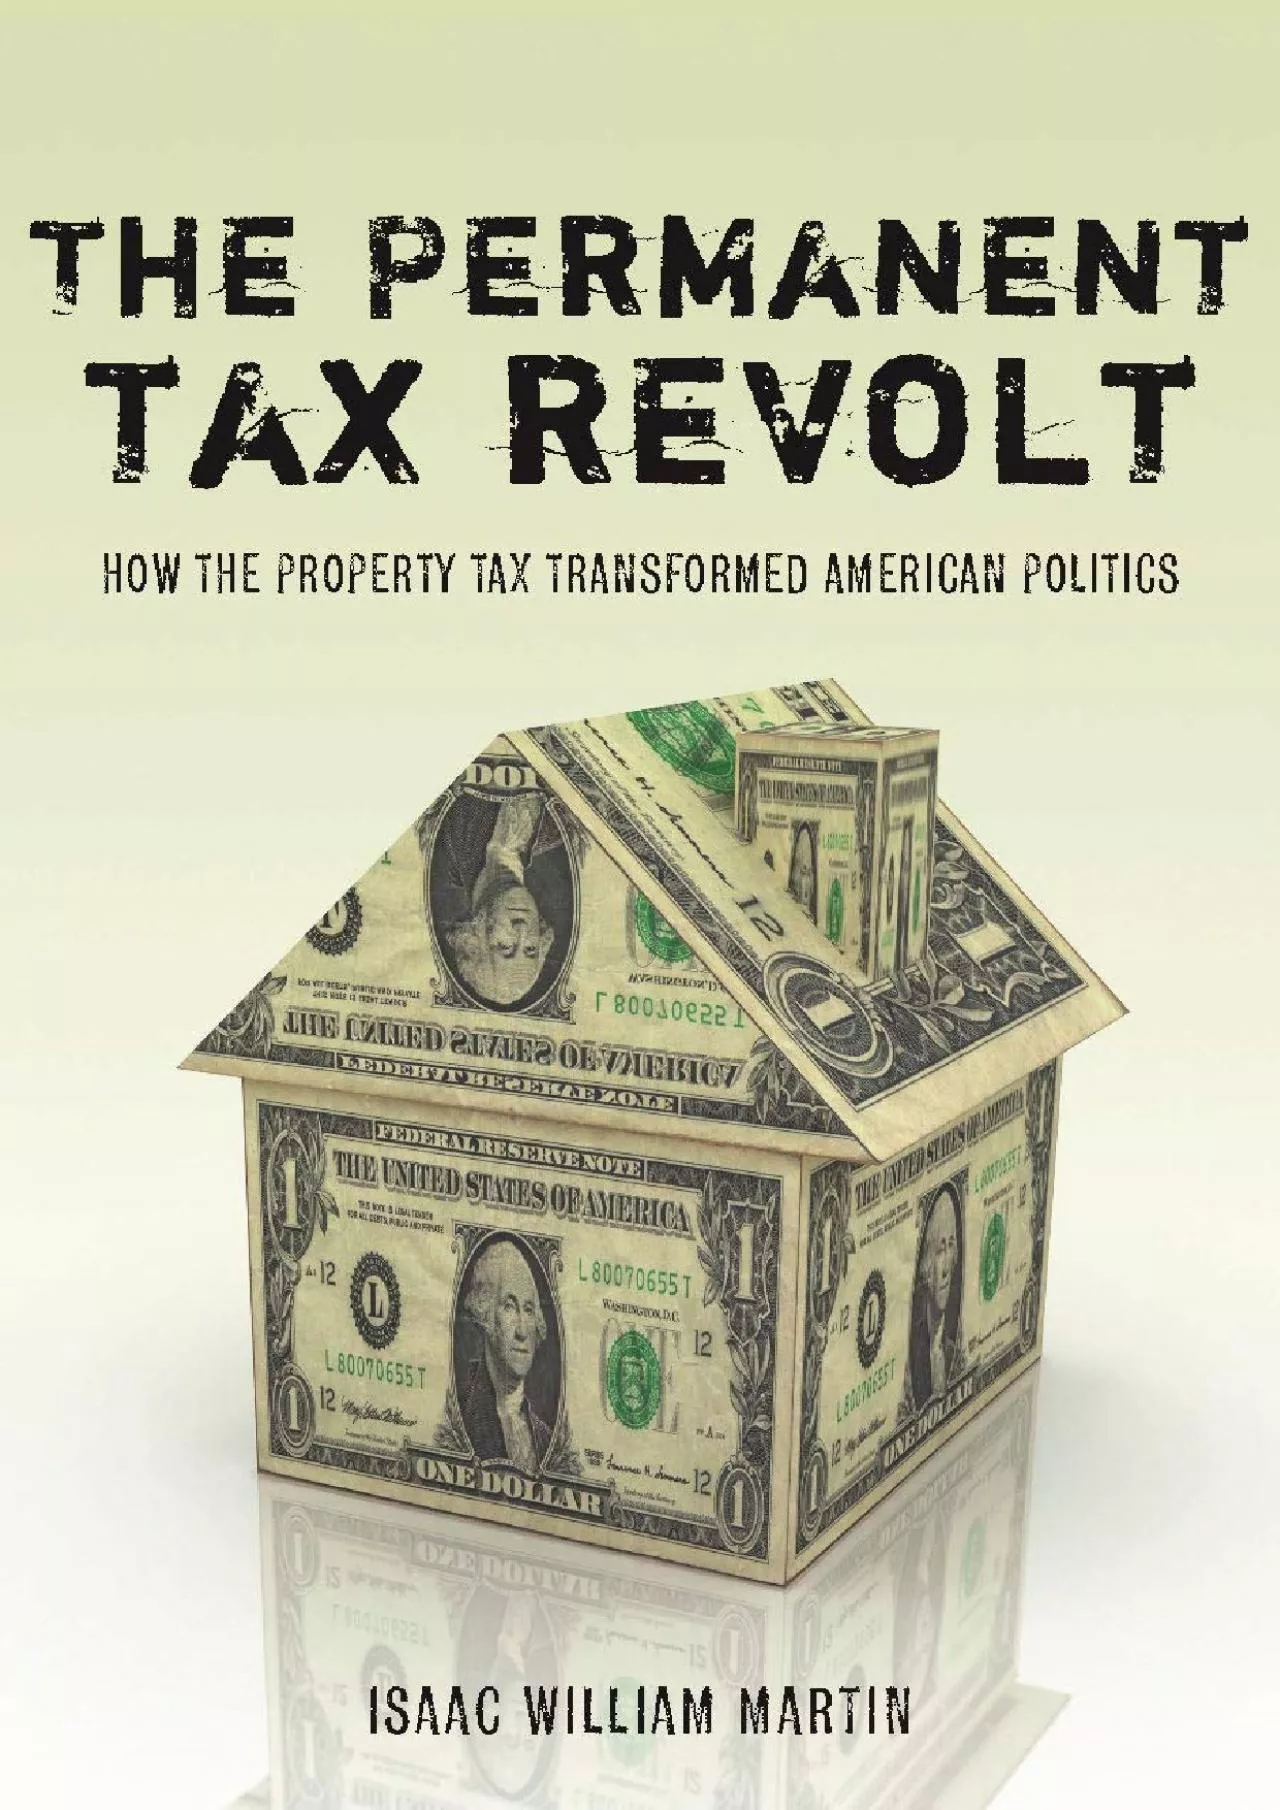 [PDF READ ONLINE] The Permanent Tax Revolt: How the Property Tax Transformed American